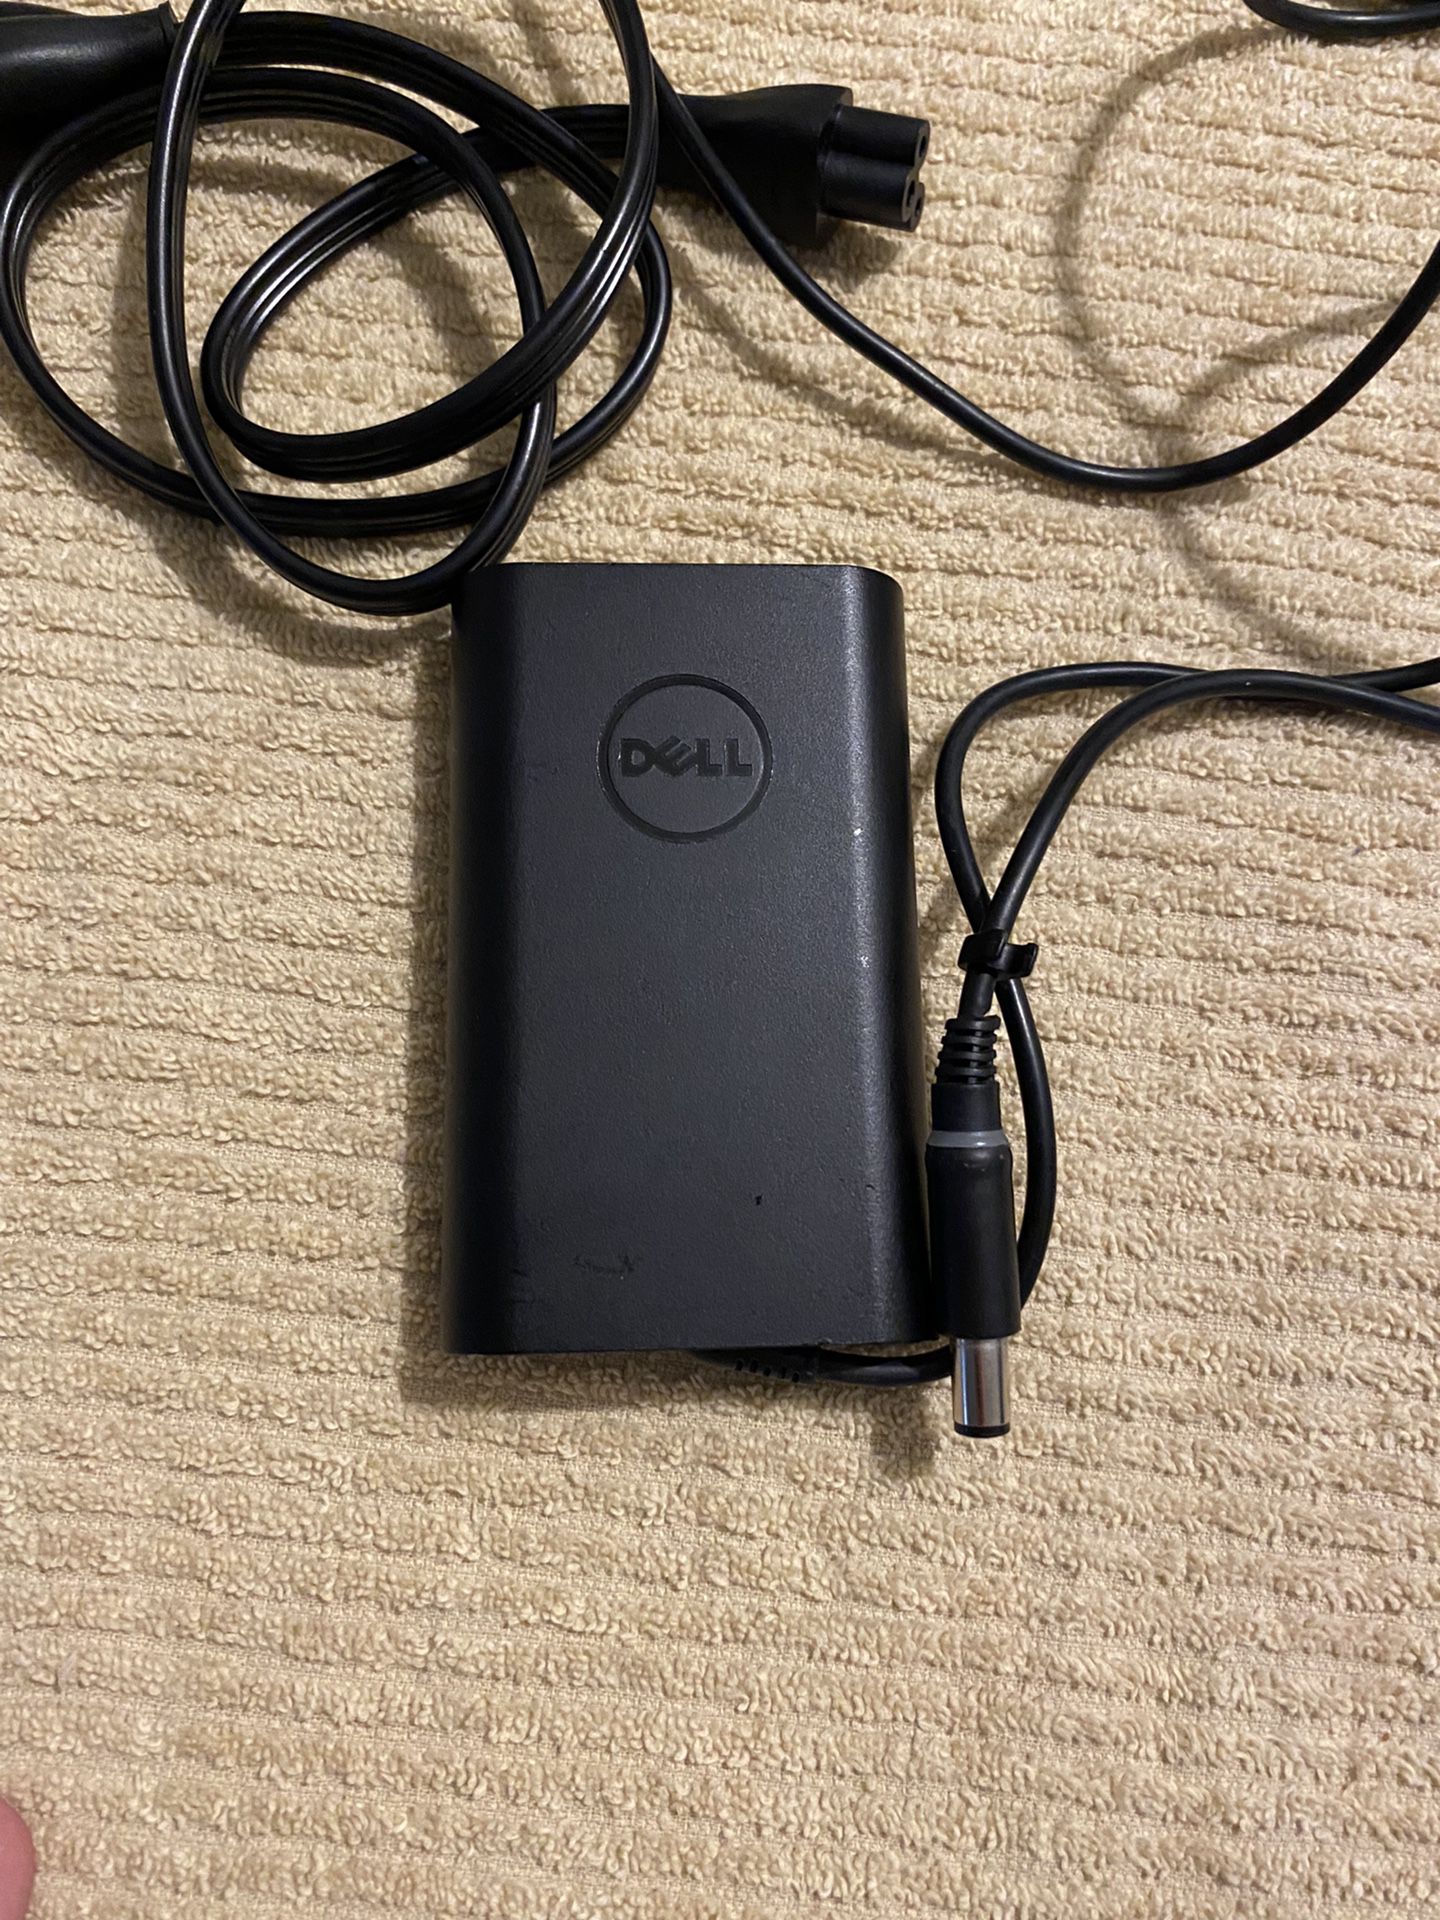 ***PRICE REDUCED FOR QUICK SALE**  Fully Functional 65 Watt Dell Laptop Charger 